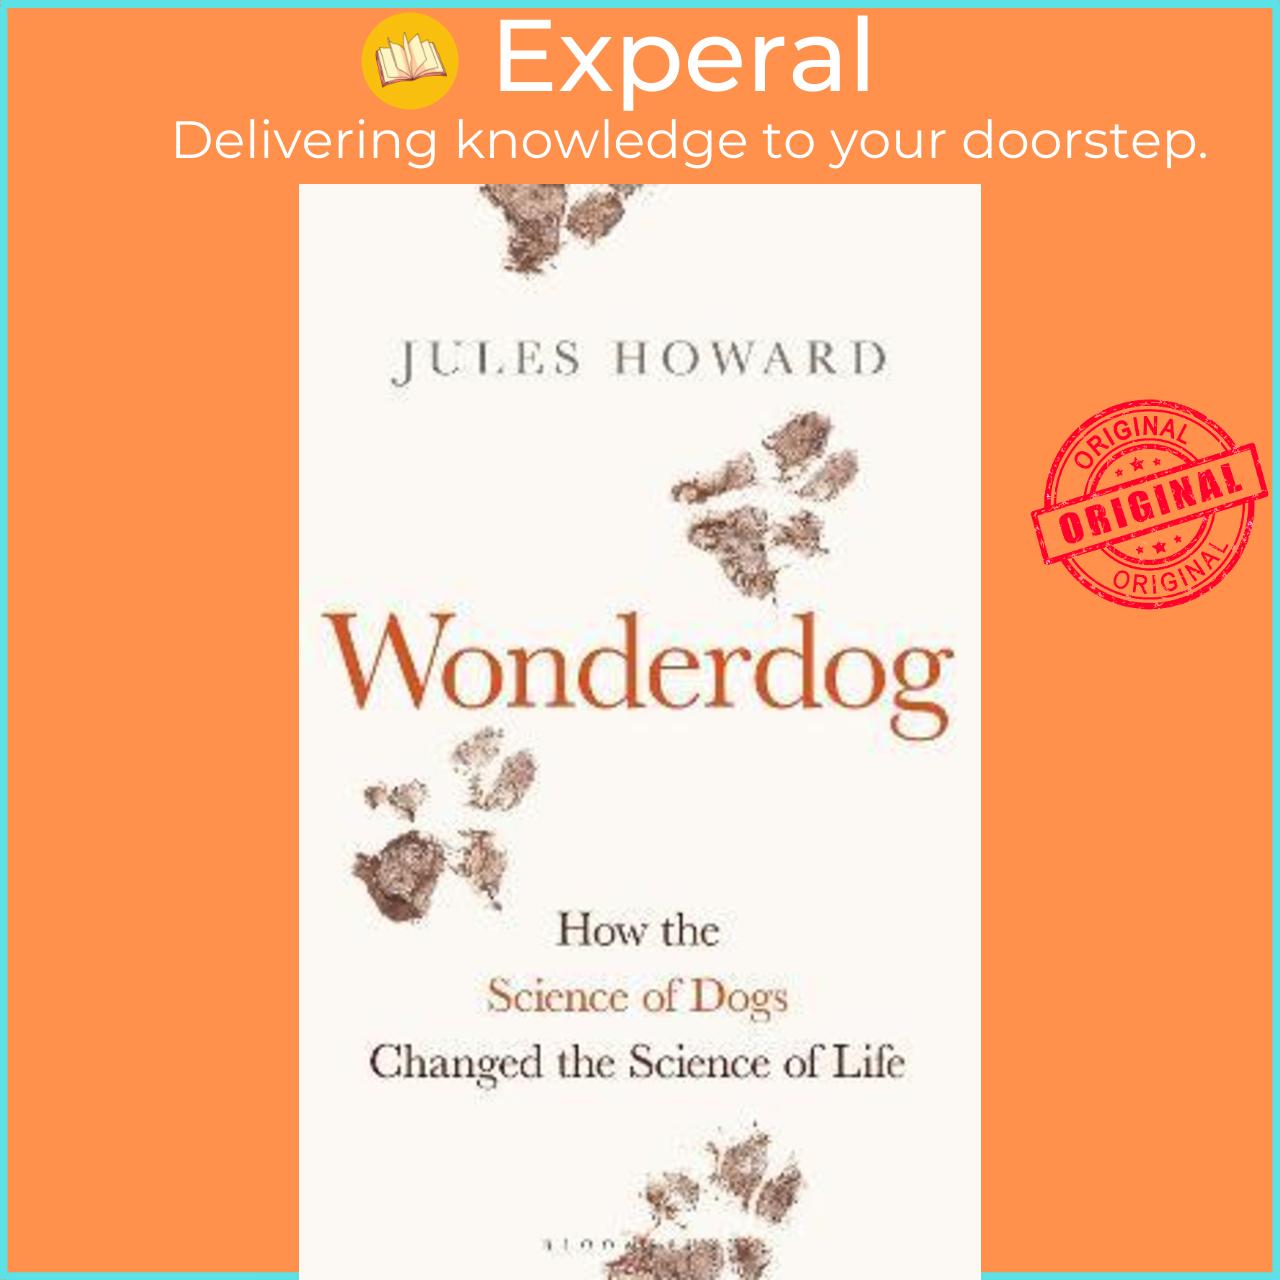 Sách - Wonderdog : How the Science of Dogs Changed the Science of Life by Jules Howard (UK edition, hardcover)